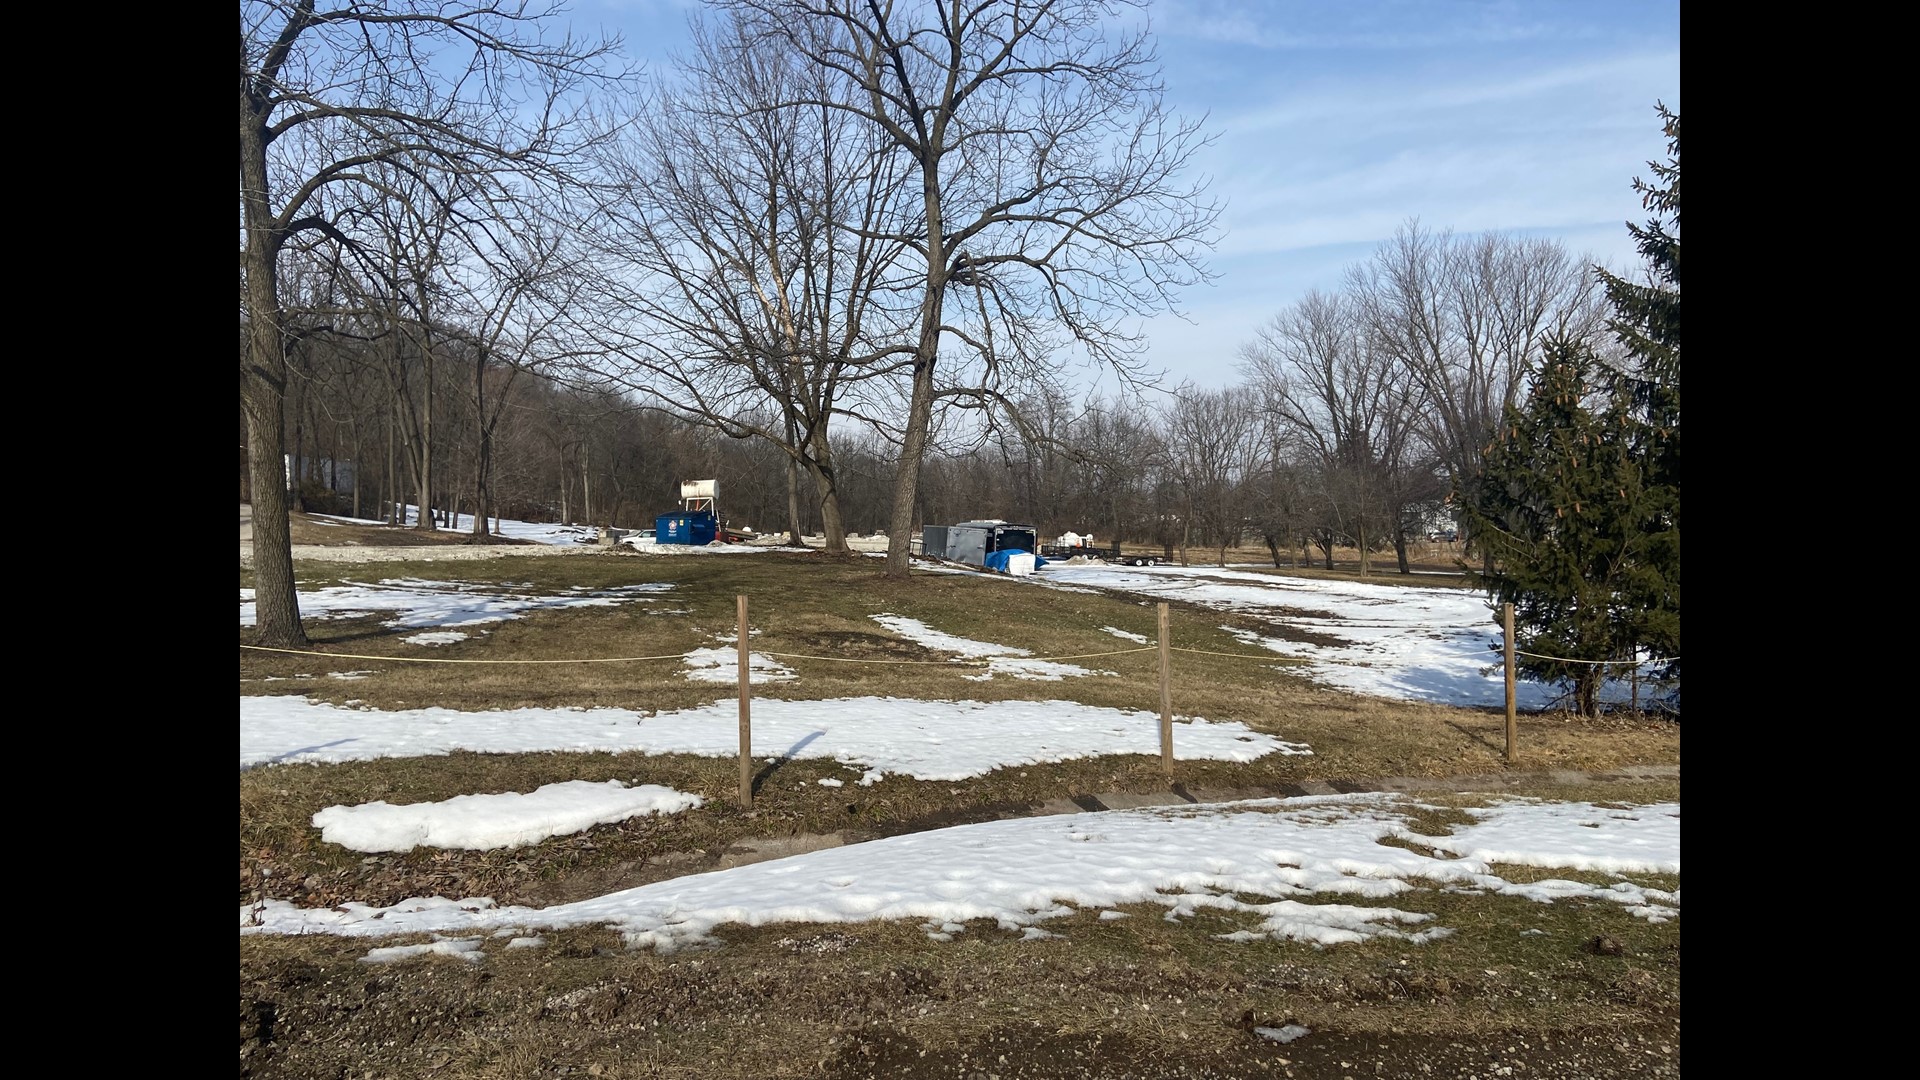 Curb Appeal is building a new location off of Route 84 and Colona Road in Carbon Cliff, Illinois.